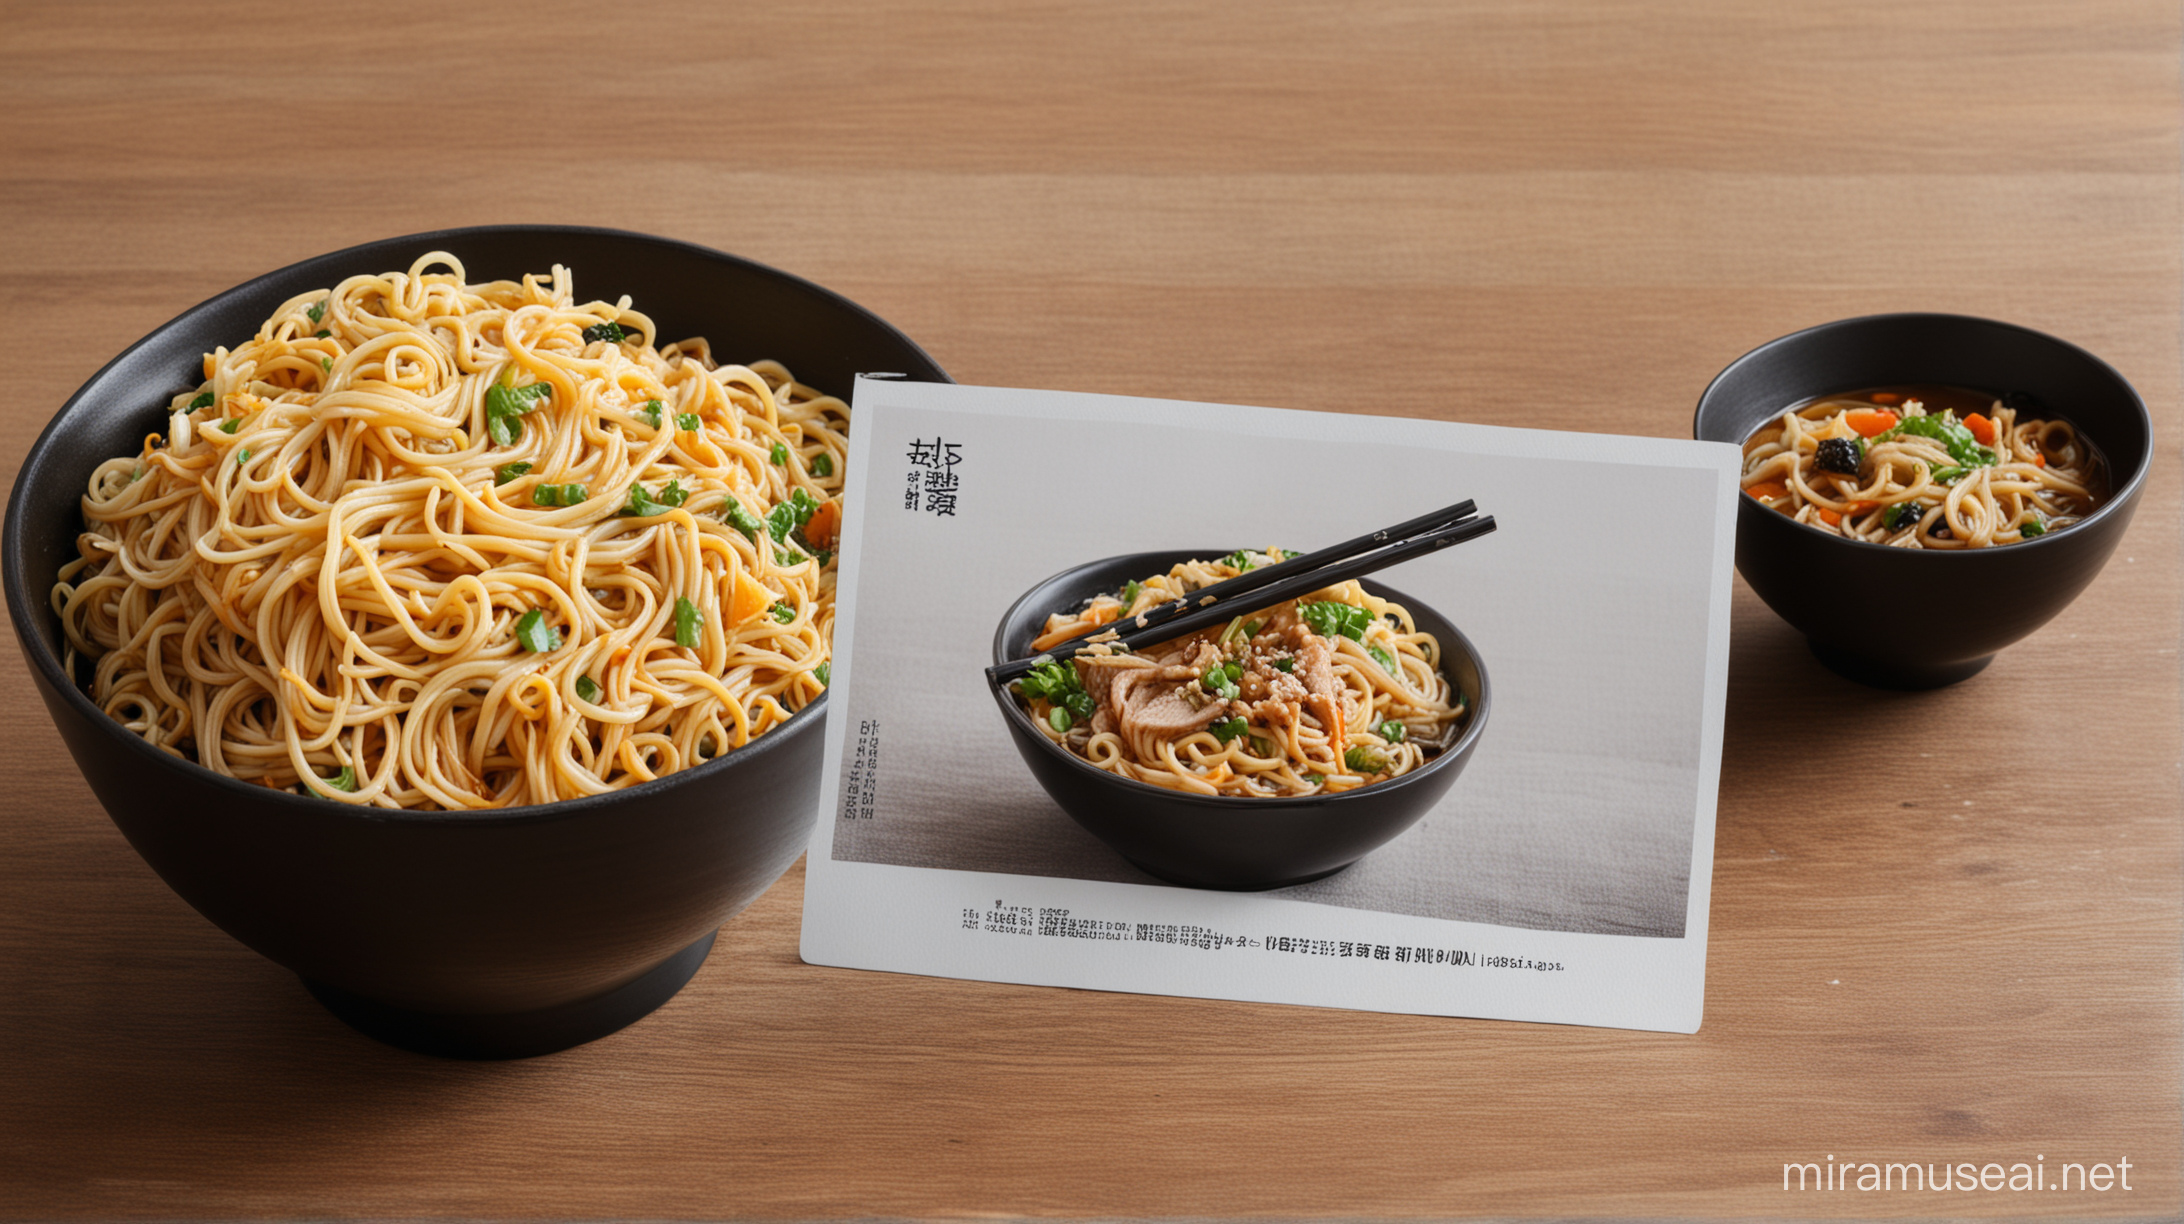 a postcard placed on a table right next to a bowl of noodles in a black bowl